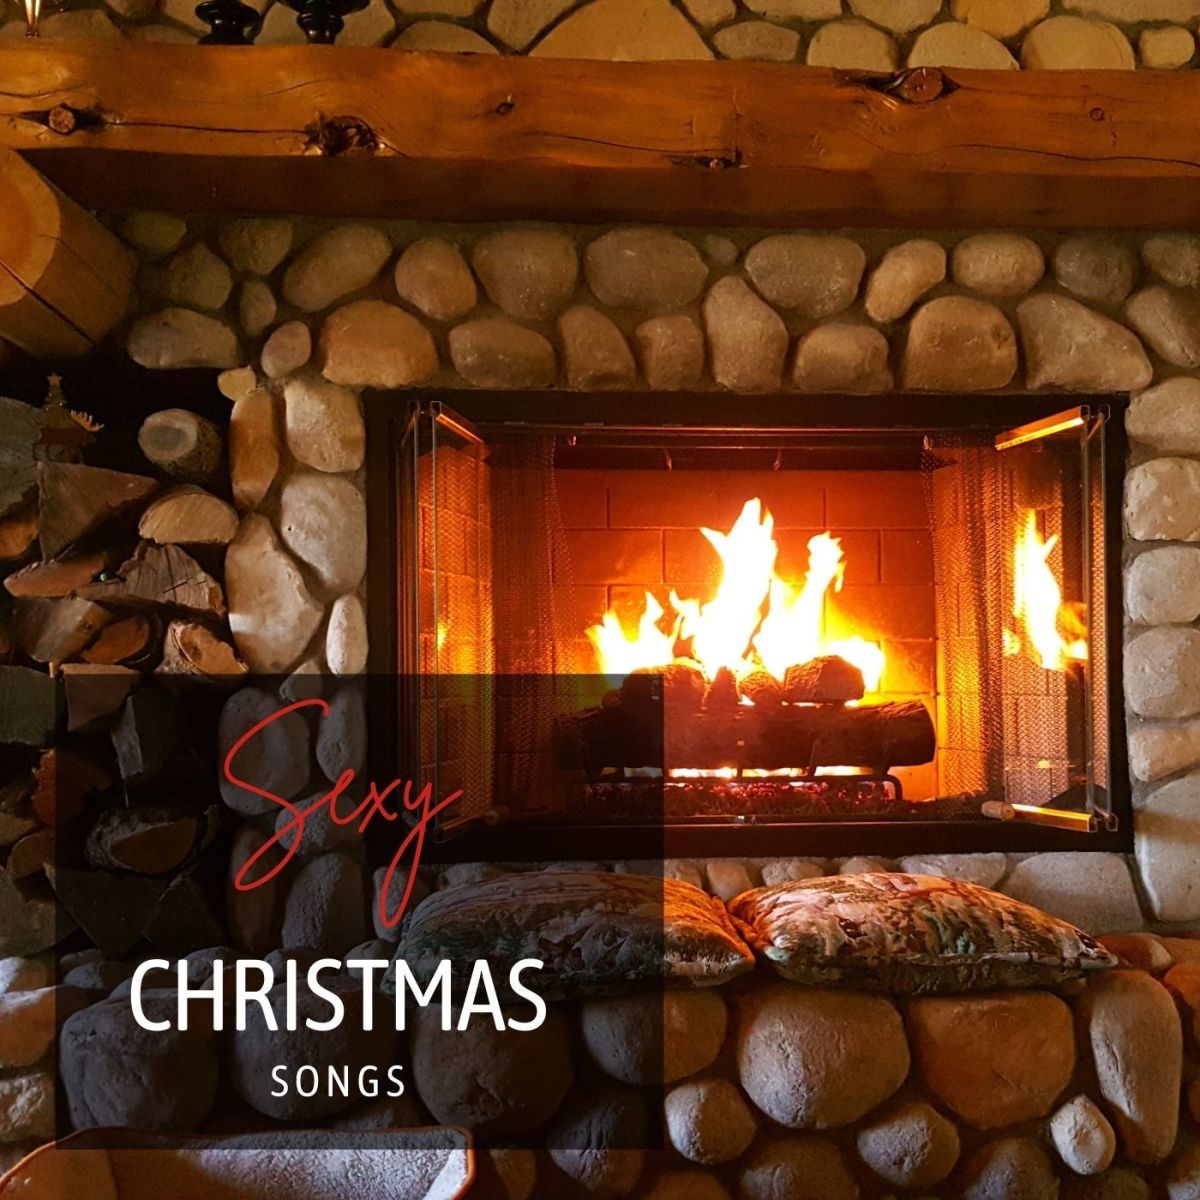 Warm yourself and your sweetheart up with some sexy Christmas music.